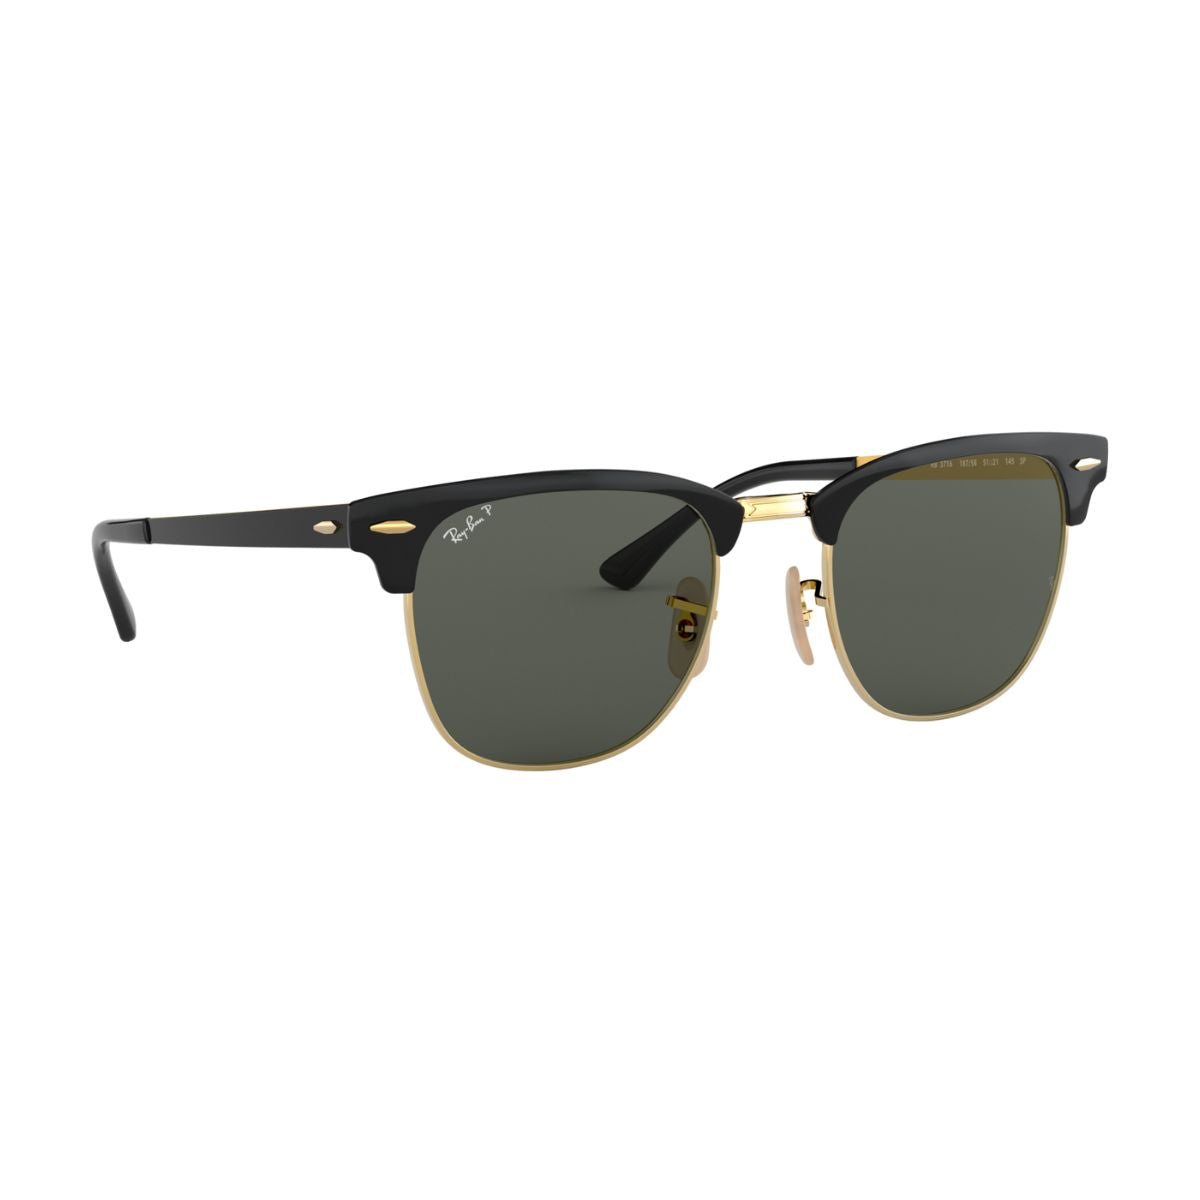 "Shop Ray Ban 3716 187/58 Polarized Metal Sunglass For Men And Women At Optorium"